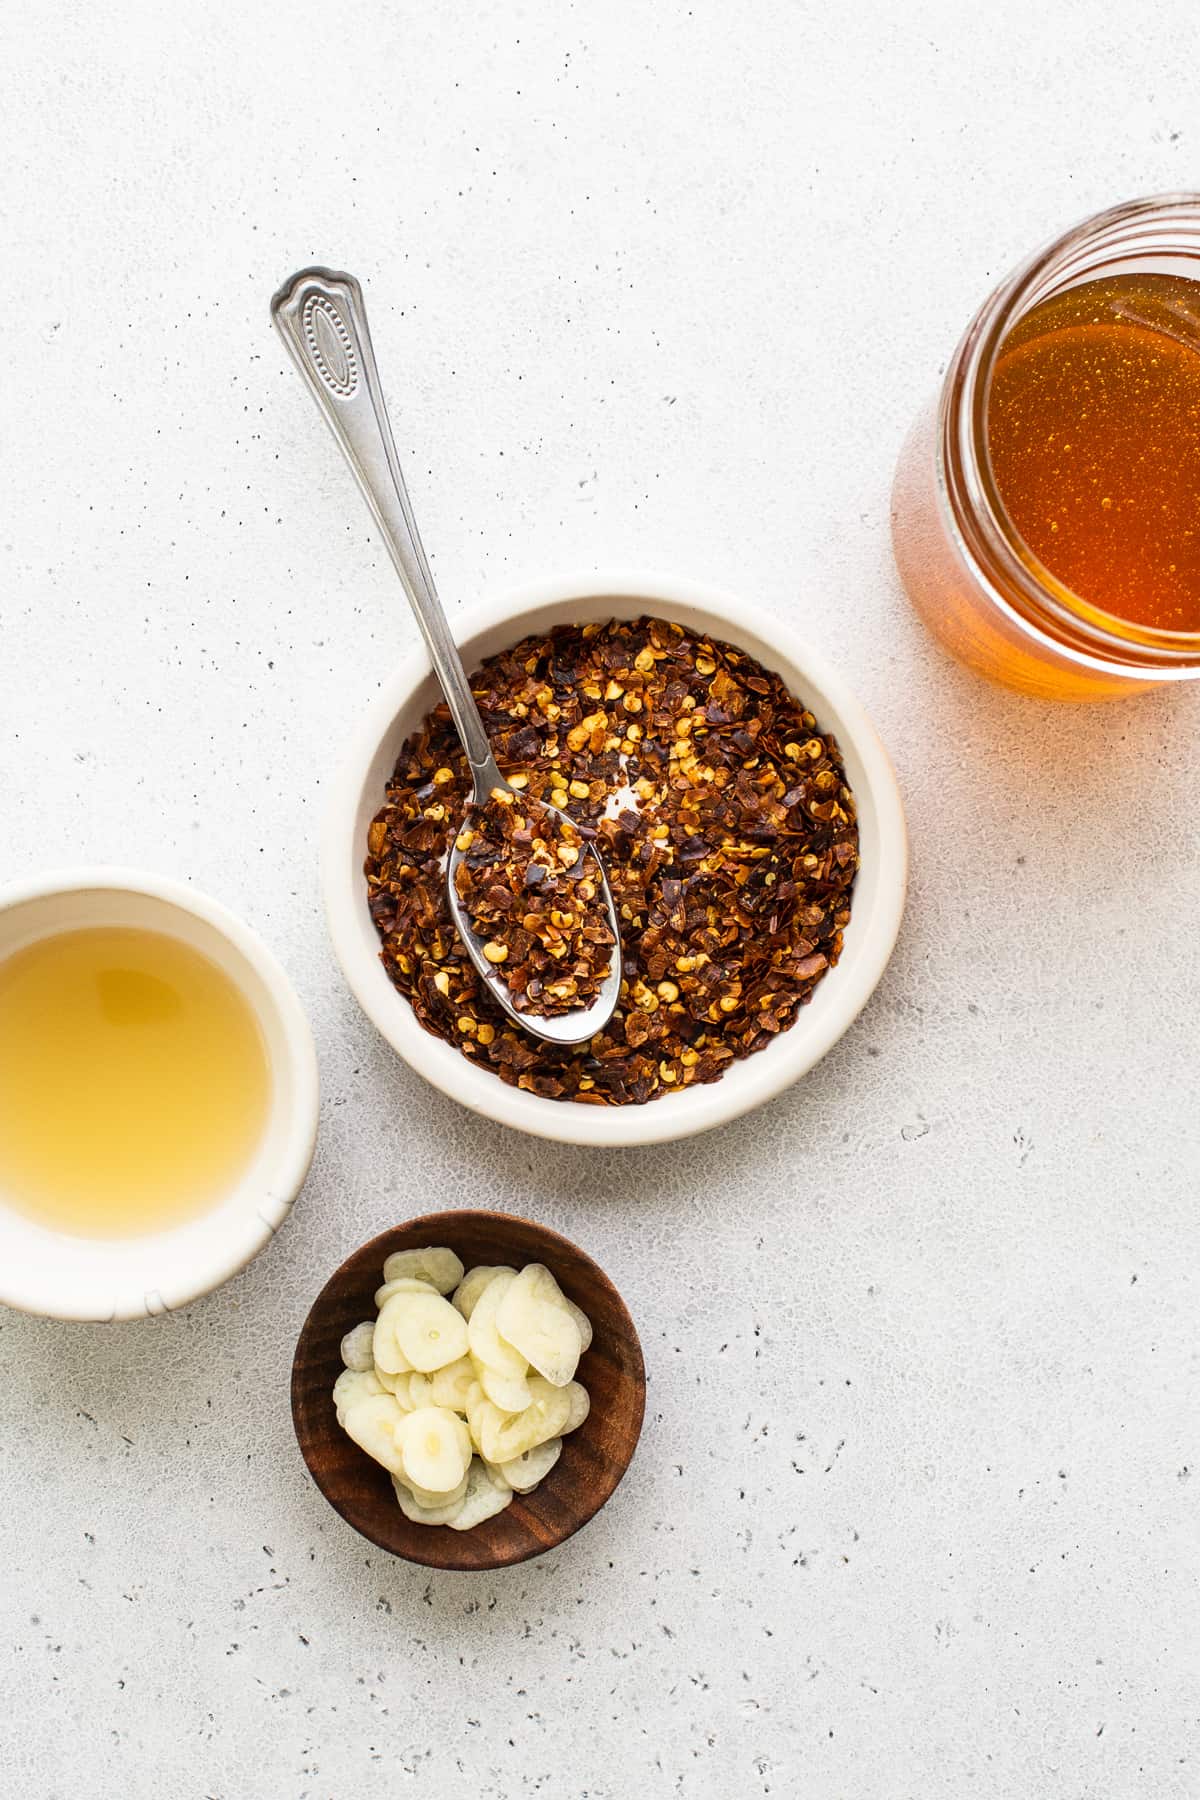 Ingredients for hot honey in bowls.